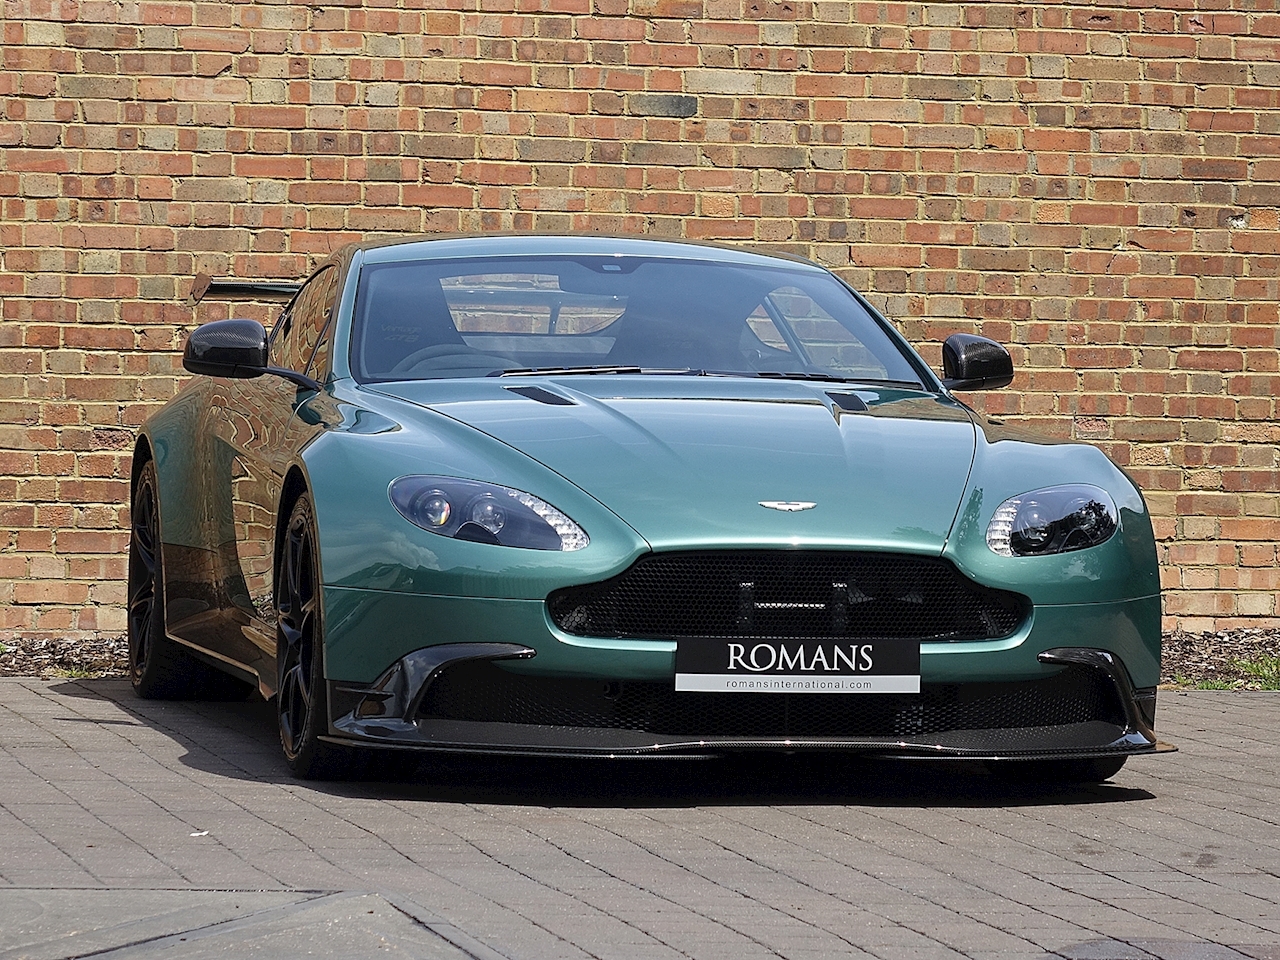 Aston martin british racing green cheap places to buy jewelry